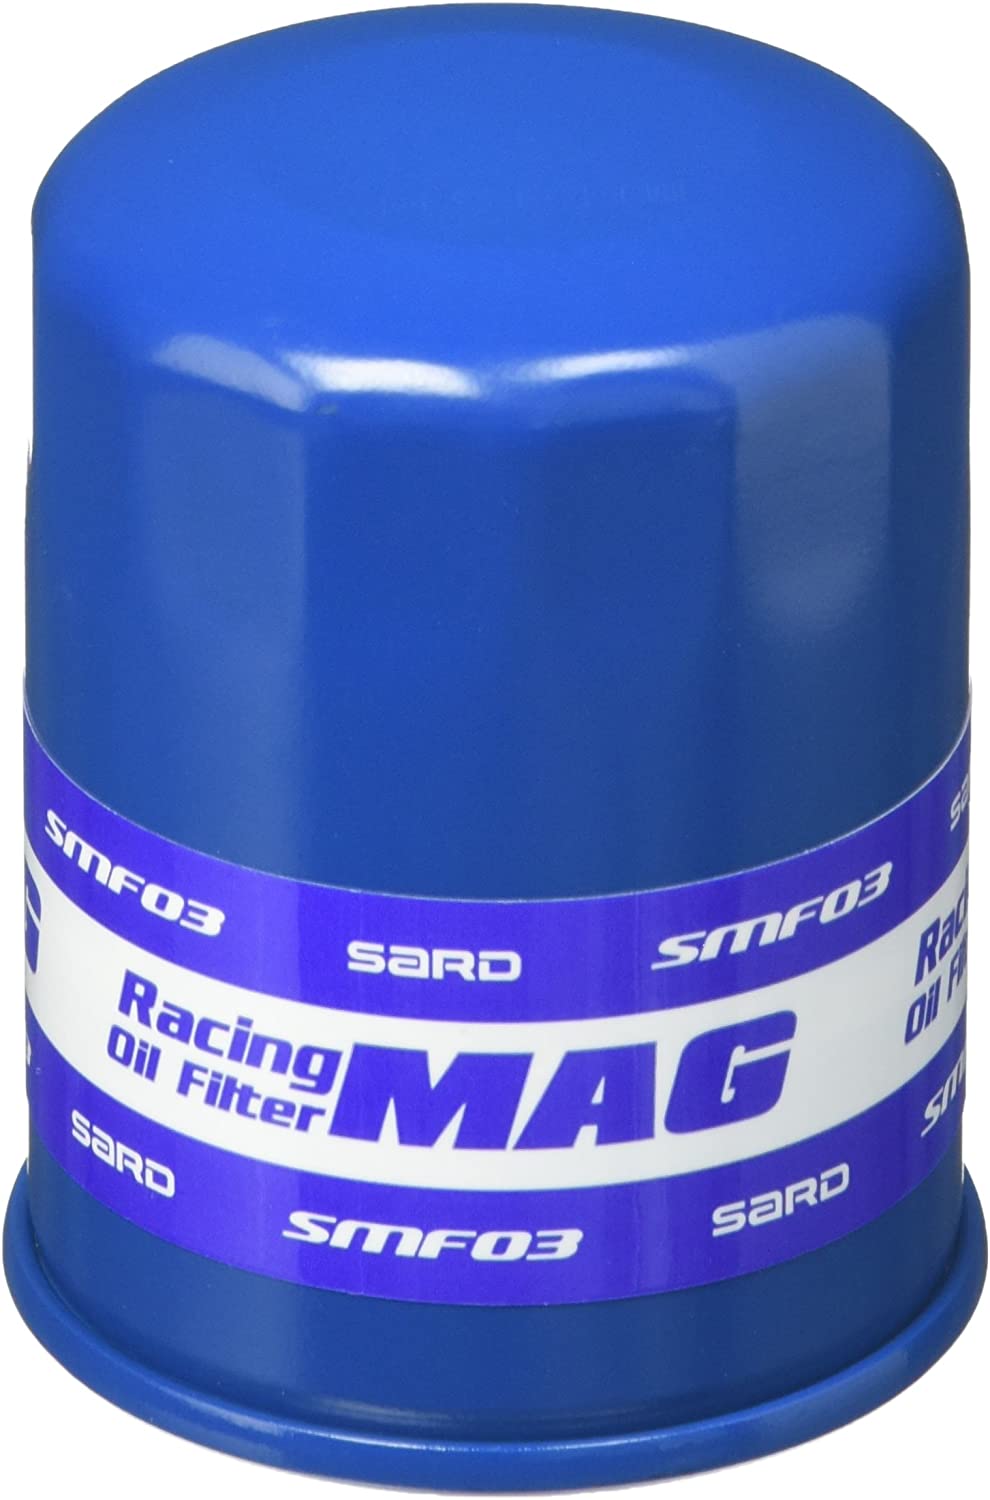 SARD RACING OIL FILTER For MR2 AW11 SMF02